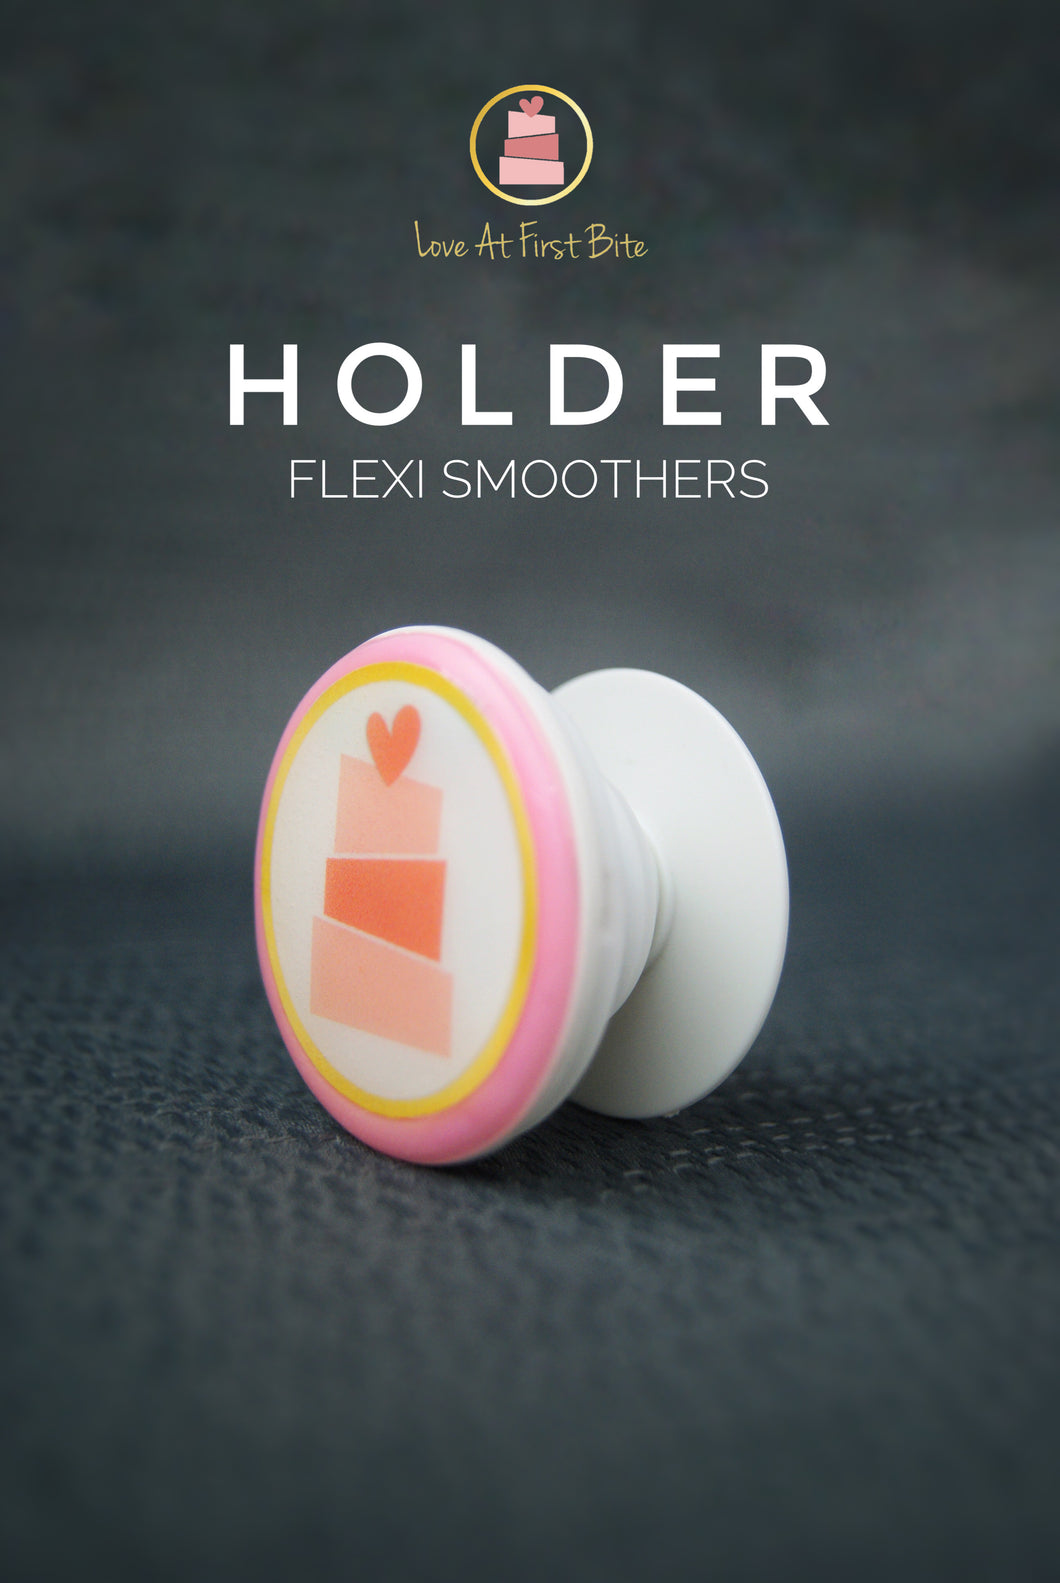 Holder for Flexi Smoothers